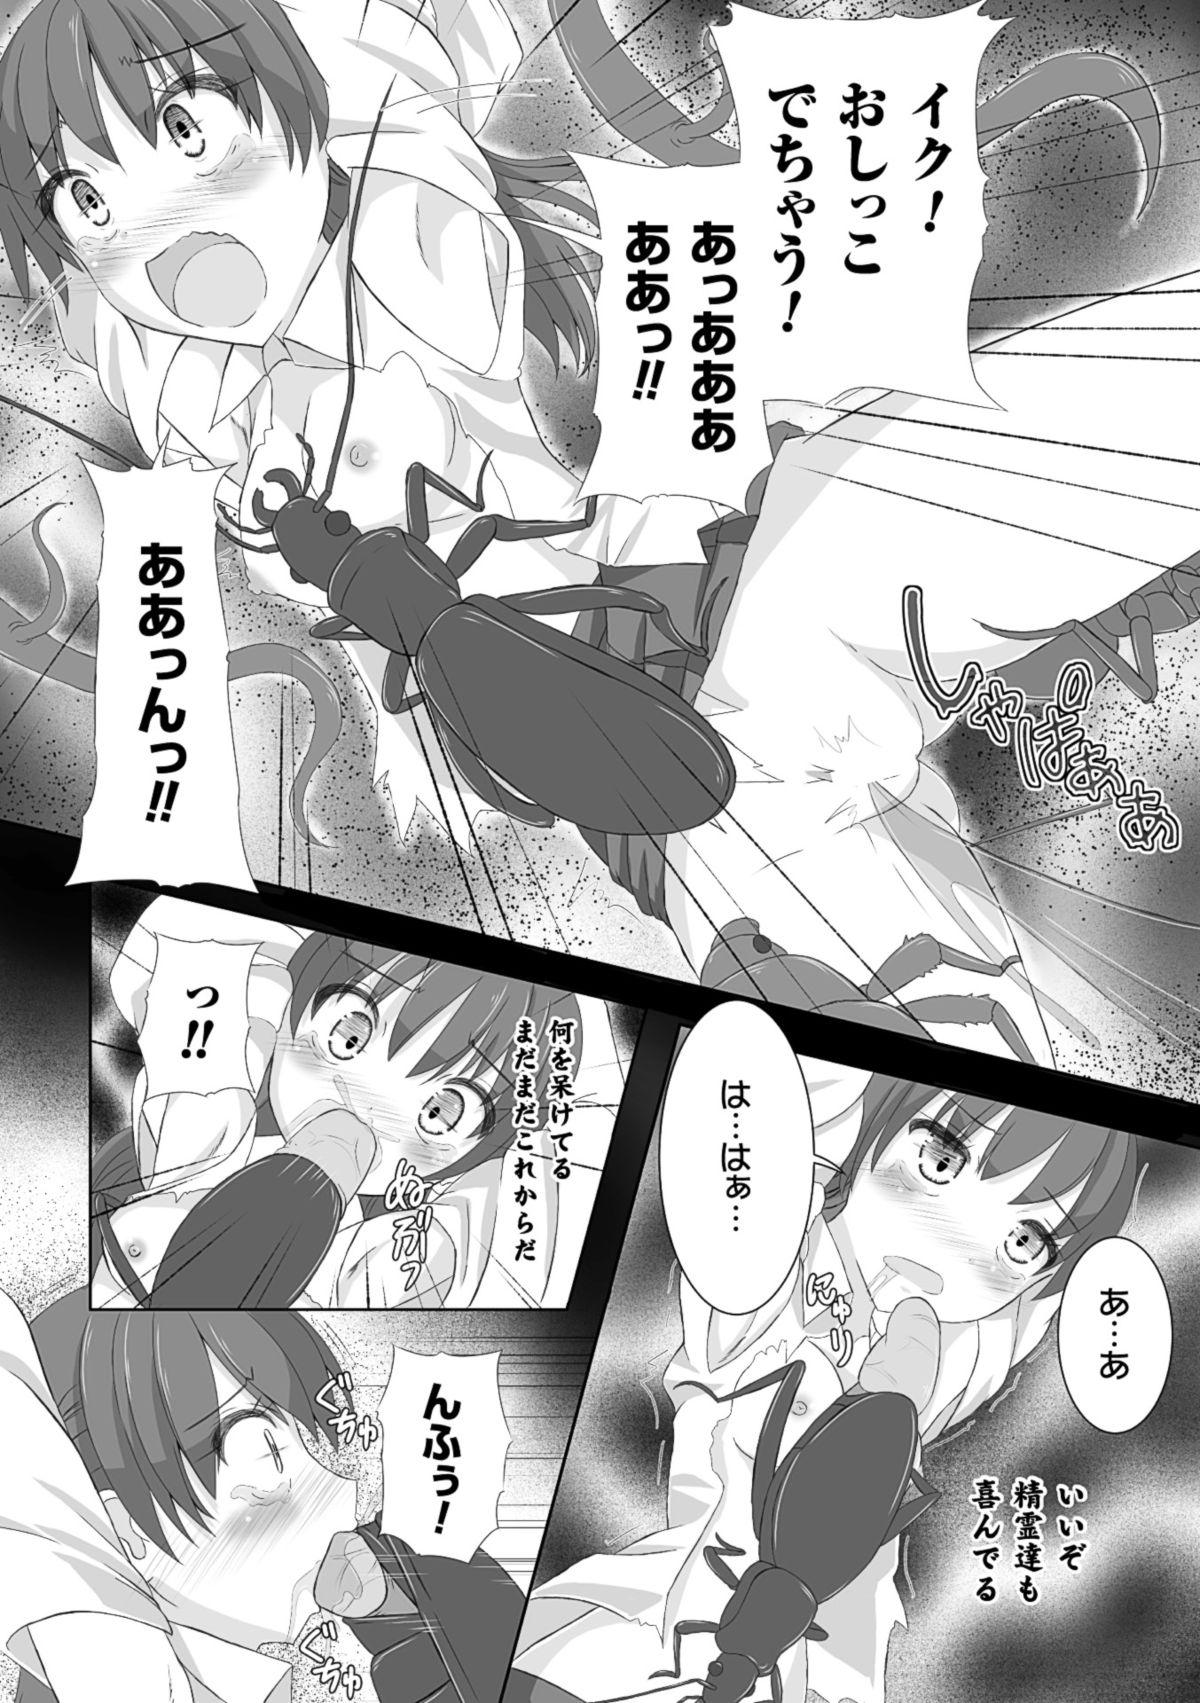 Masturbando It is safety of insect tangling picture scroll ~ forest priestess, Nanae - Dyke - Page 10